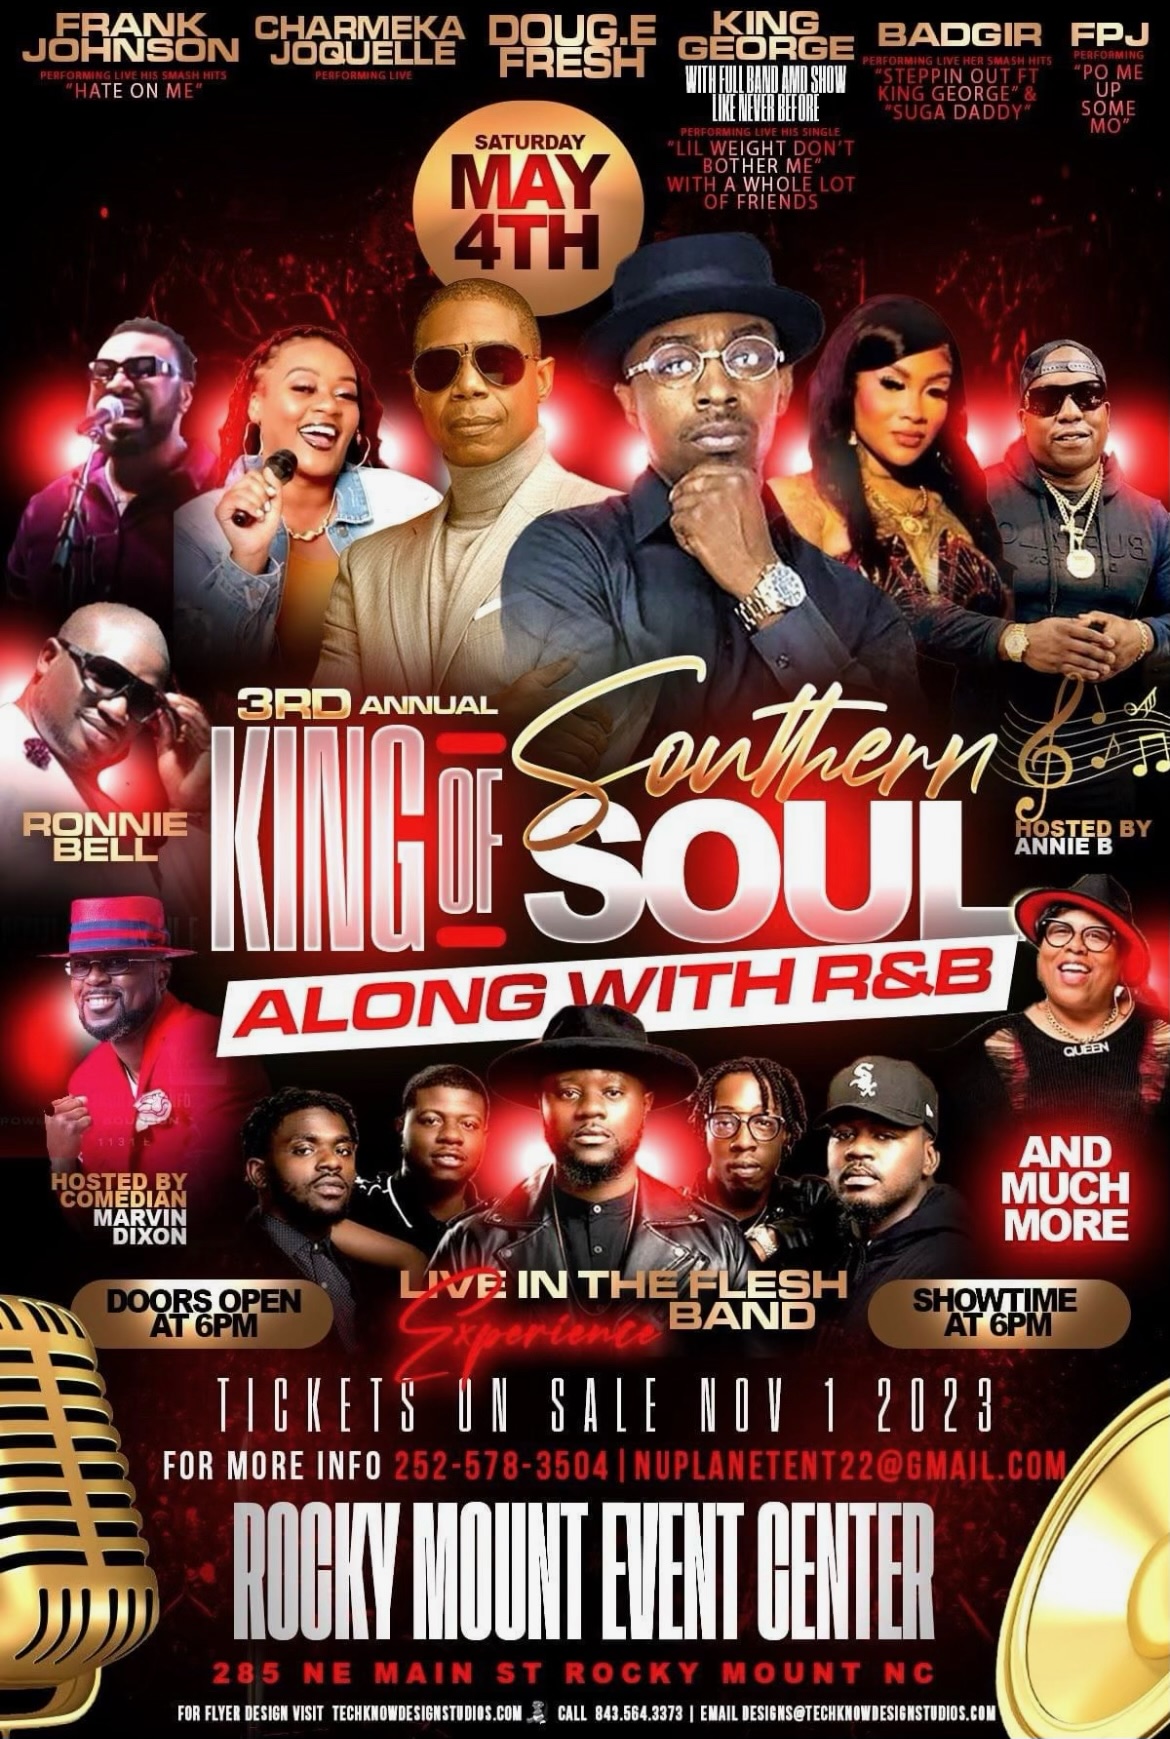 3rd Annual King of Southern Soul & R&B Concert